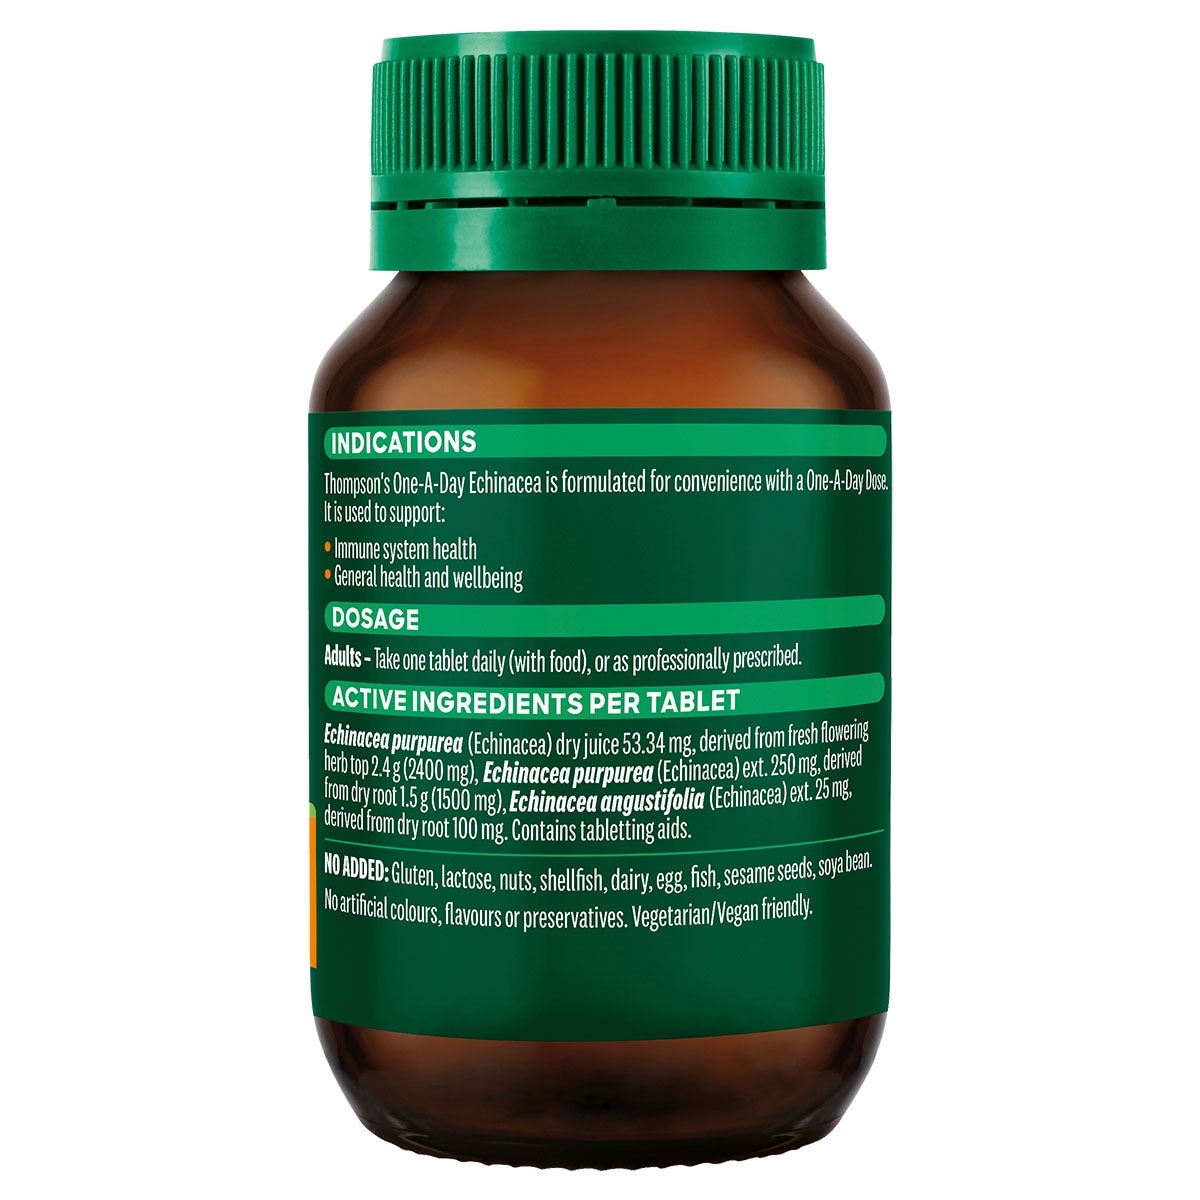 Thompsons One a Day Echinacea 4000mg 60 Tablets